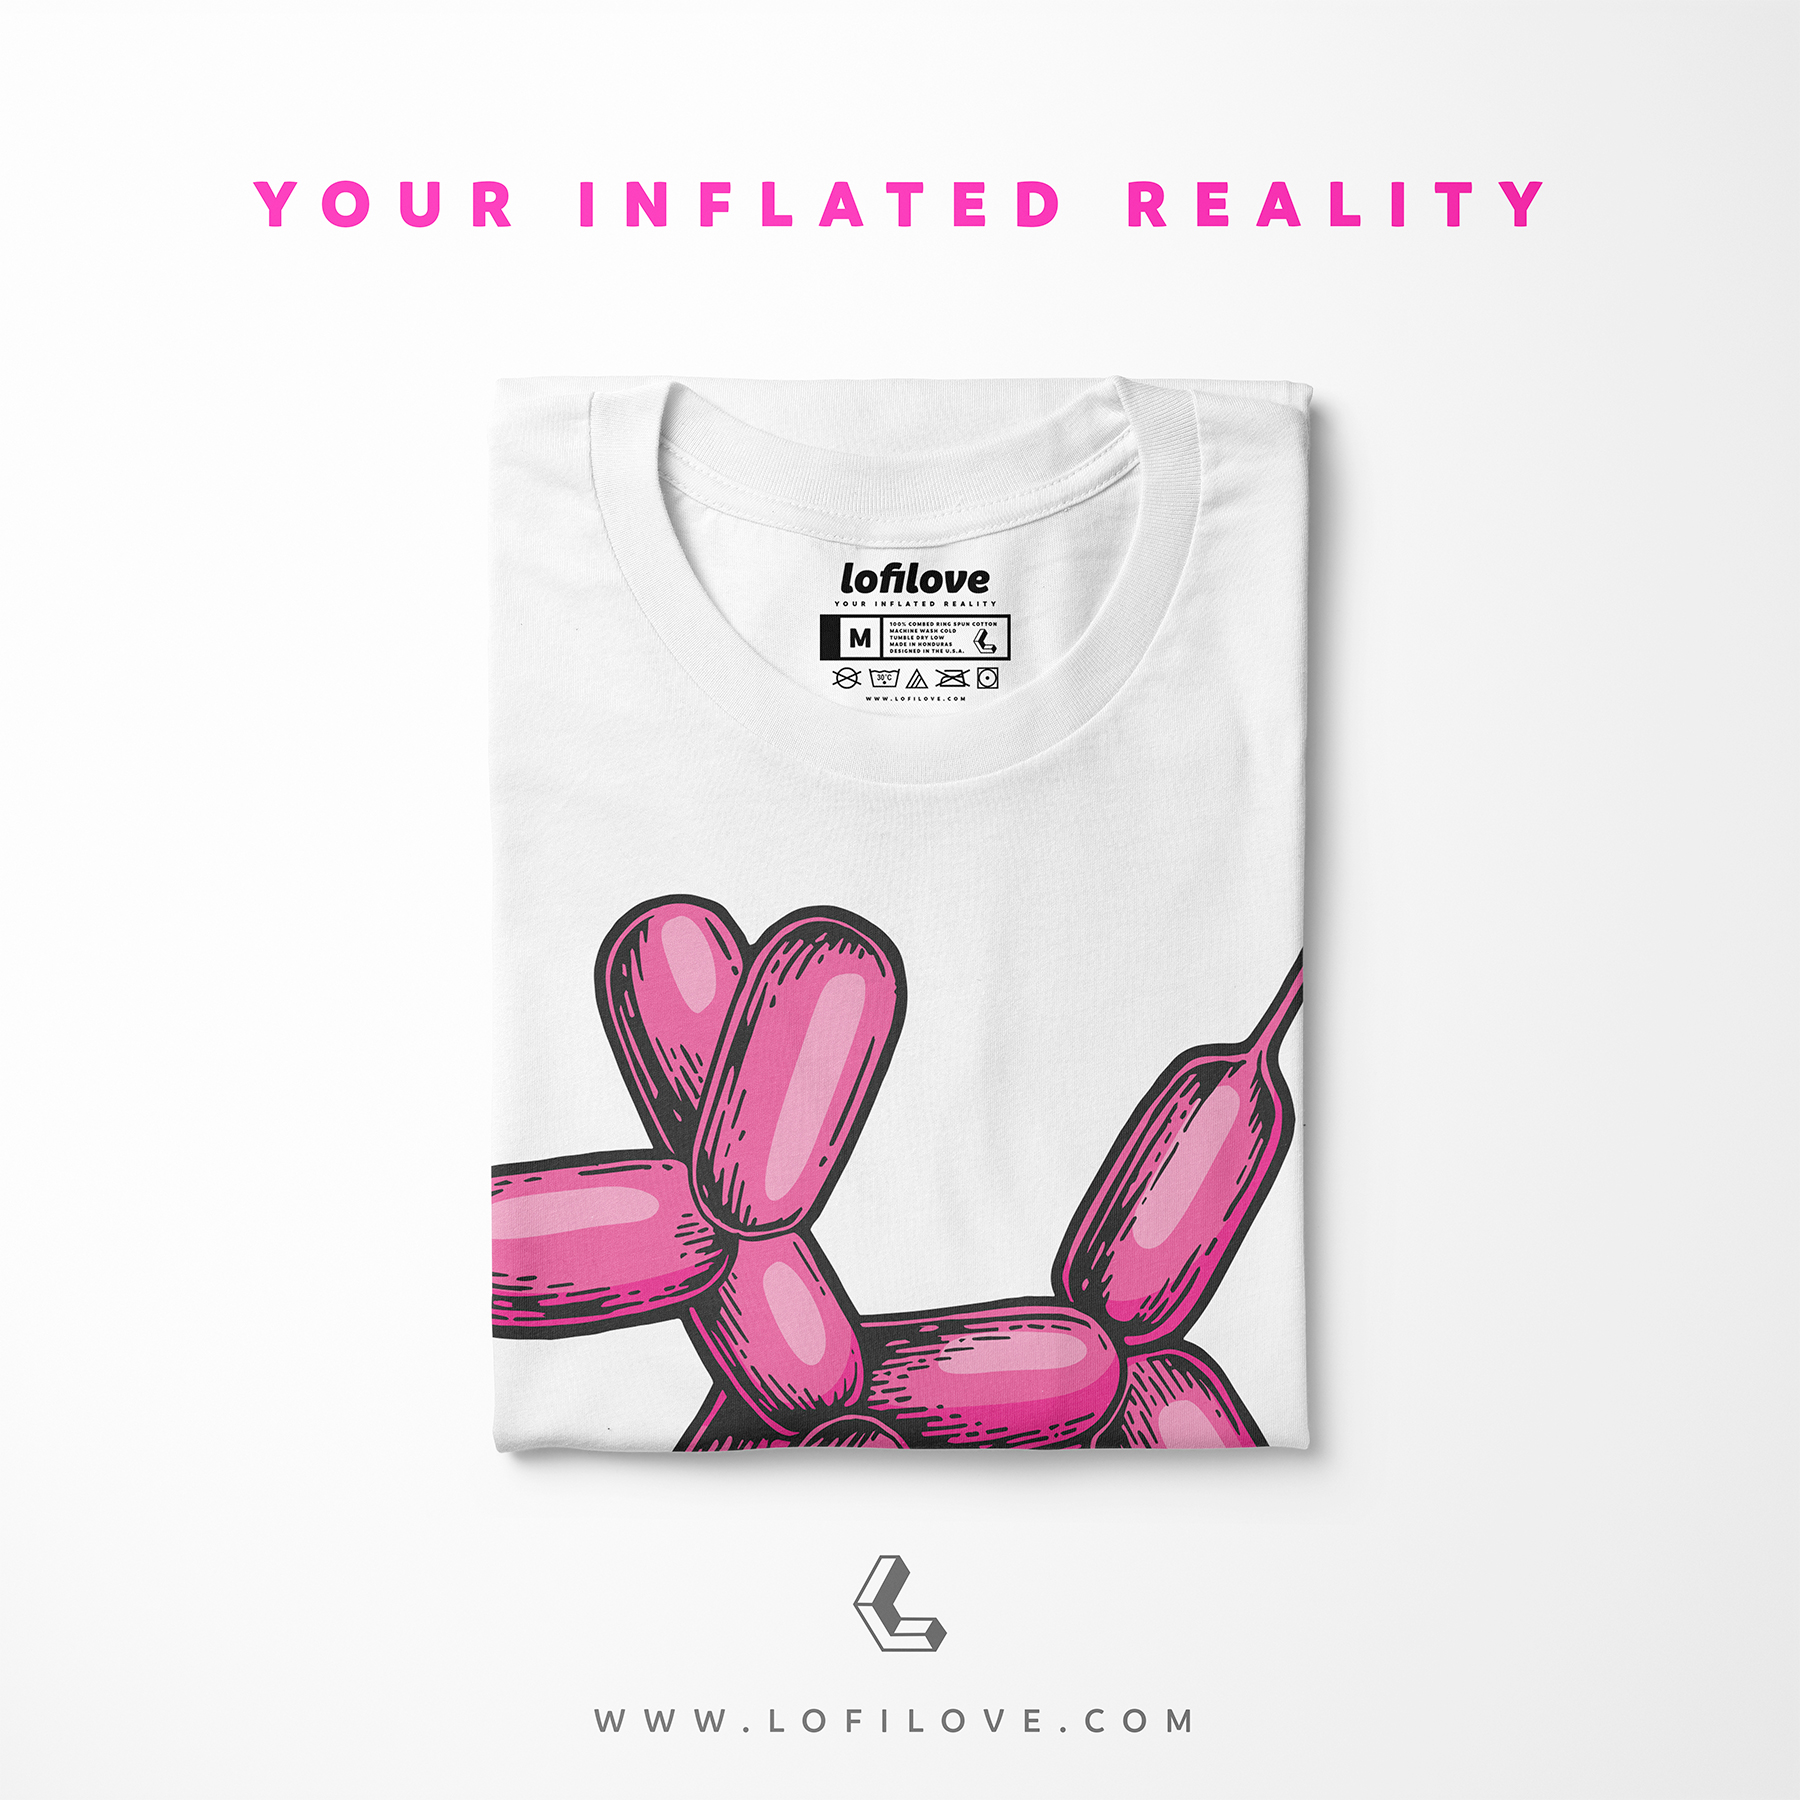 lofilove-your-inflated-reality-tee-2